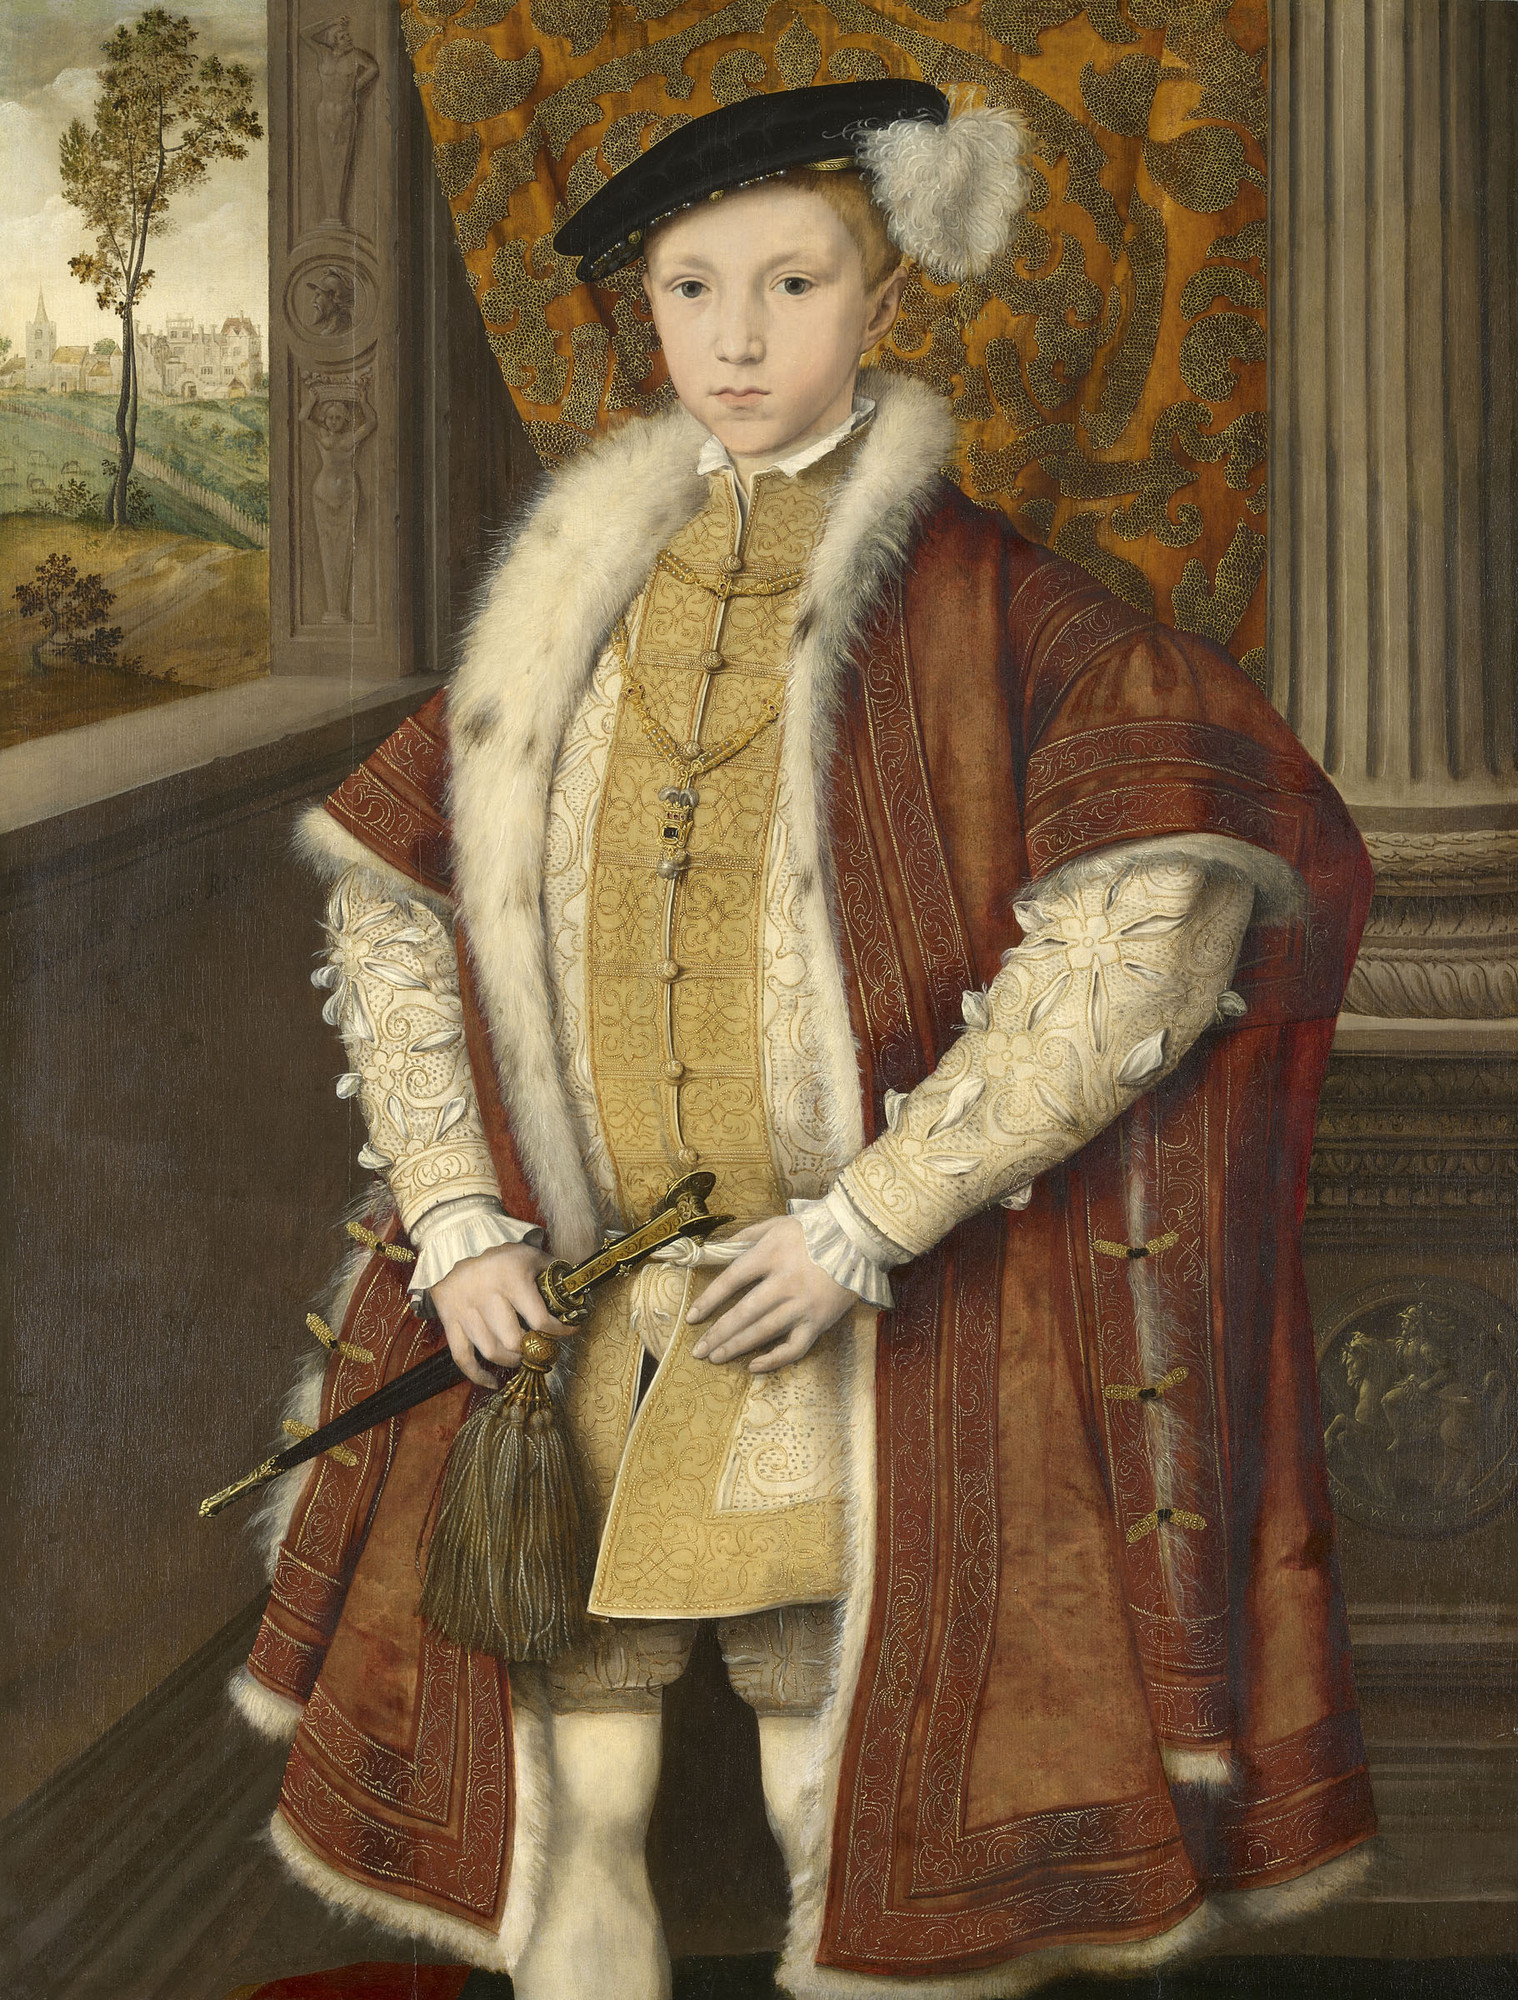 Painting showing Edward VI standing by a window